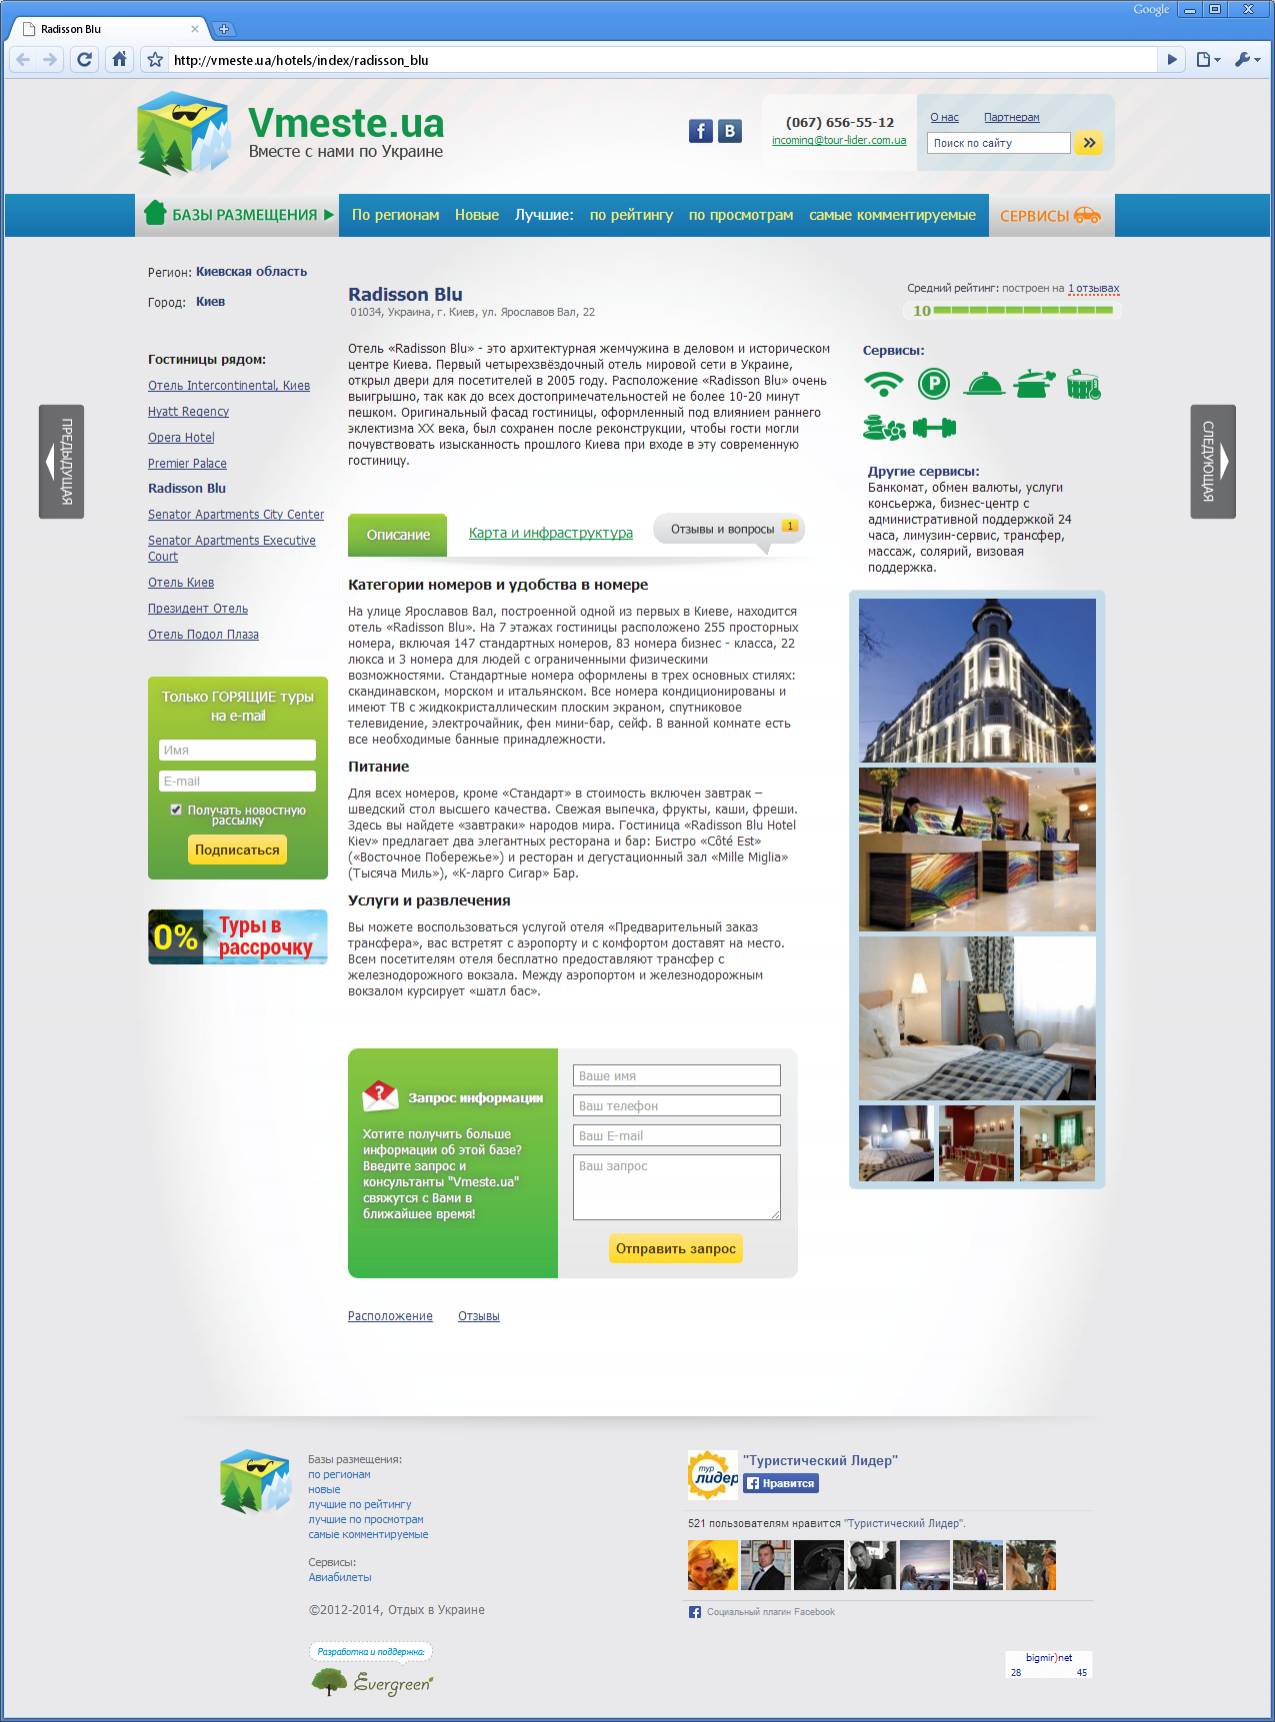 Vmeste.ua conceived as a portal where you can find and see any hotel in Ukraine, and order a number of services, from booking accommodation to tours in different regions of Ukraine. | Evergreen projects | Evergreen projects 10